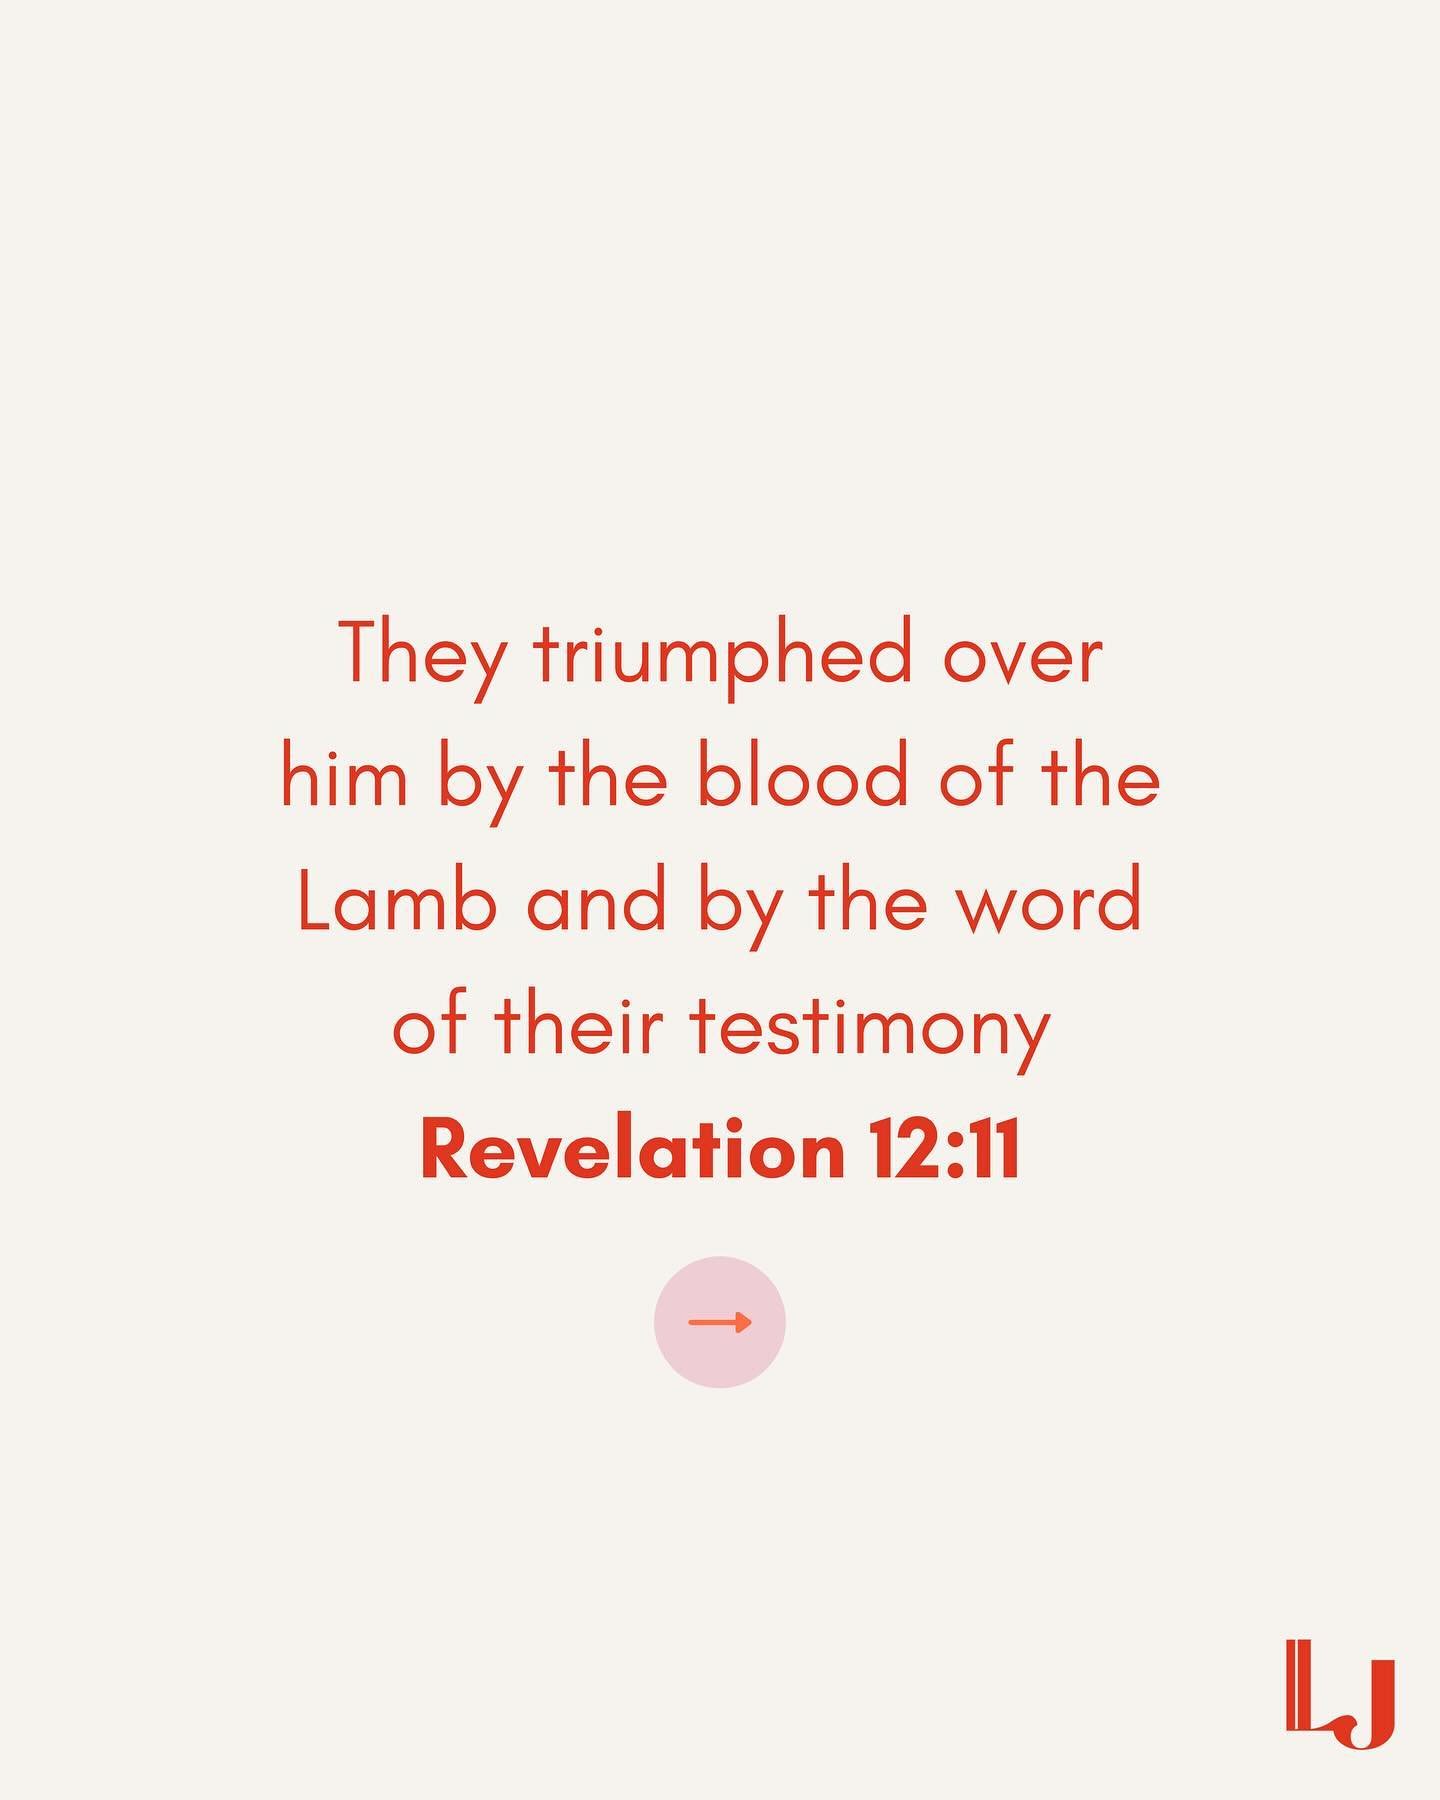 Let&rsquo;s step into the weekend remembering God, not just through the testimony of those around us, but through the story God is writing in our own lives.

Revelation 12:11 says that they triumphed over him by the blood of the lamb and the word of 